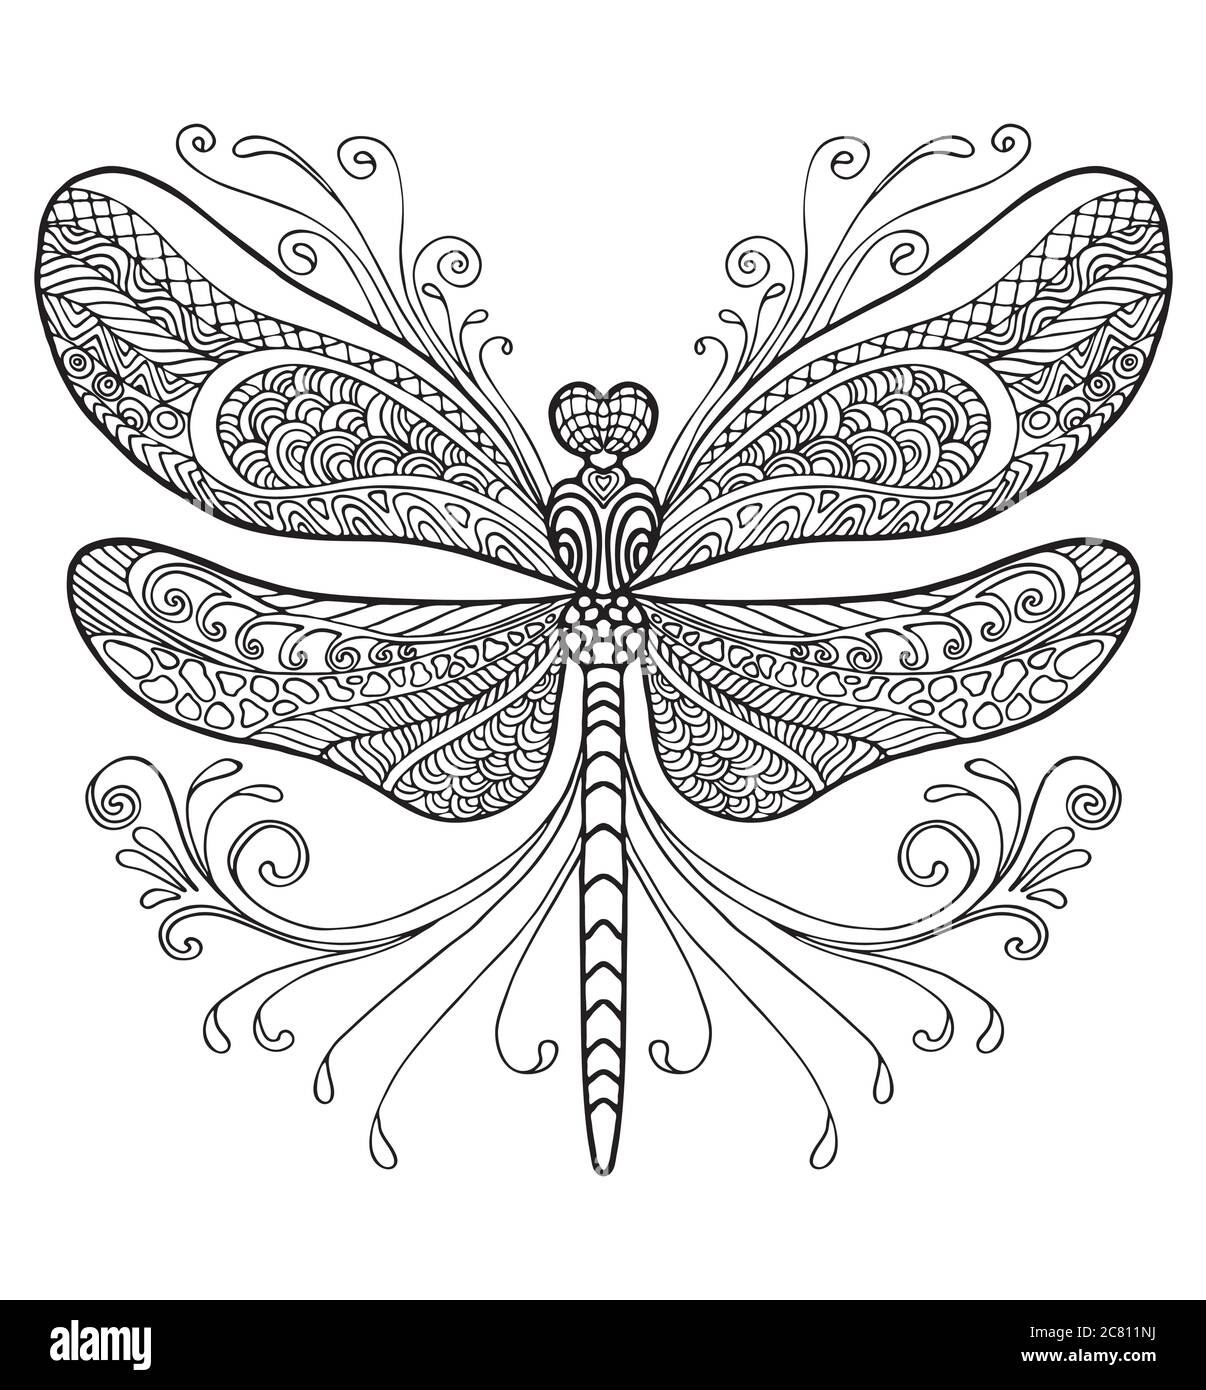 Coloring ornamental fantasy dragonfly. Vector decorative abstract vector contour illustration isolated on white background. Stock illustration for adu Stock Vector